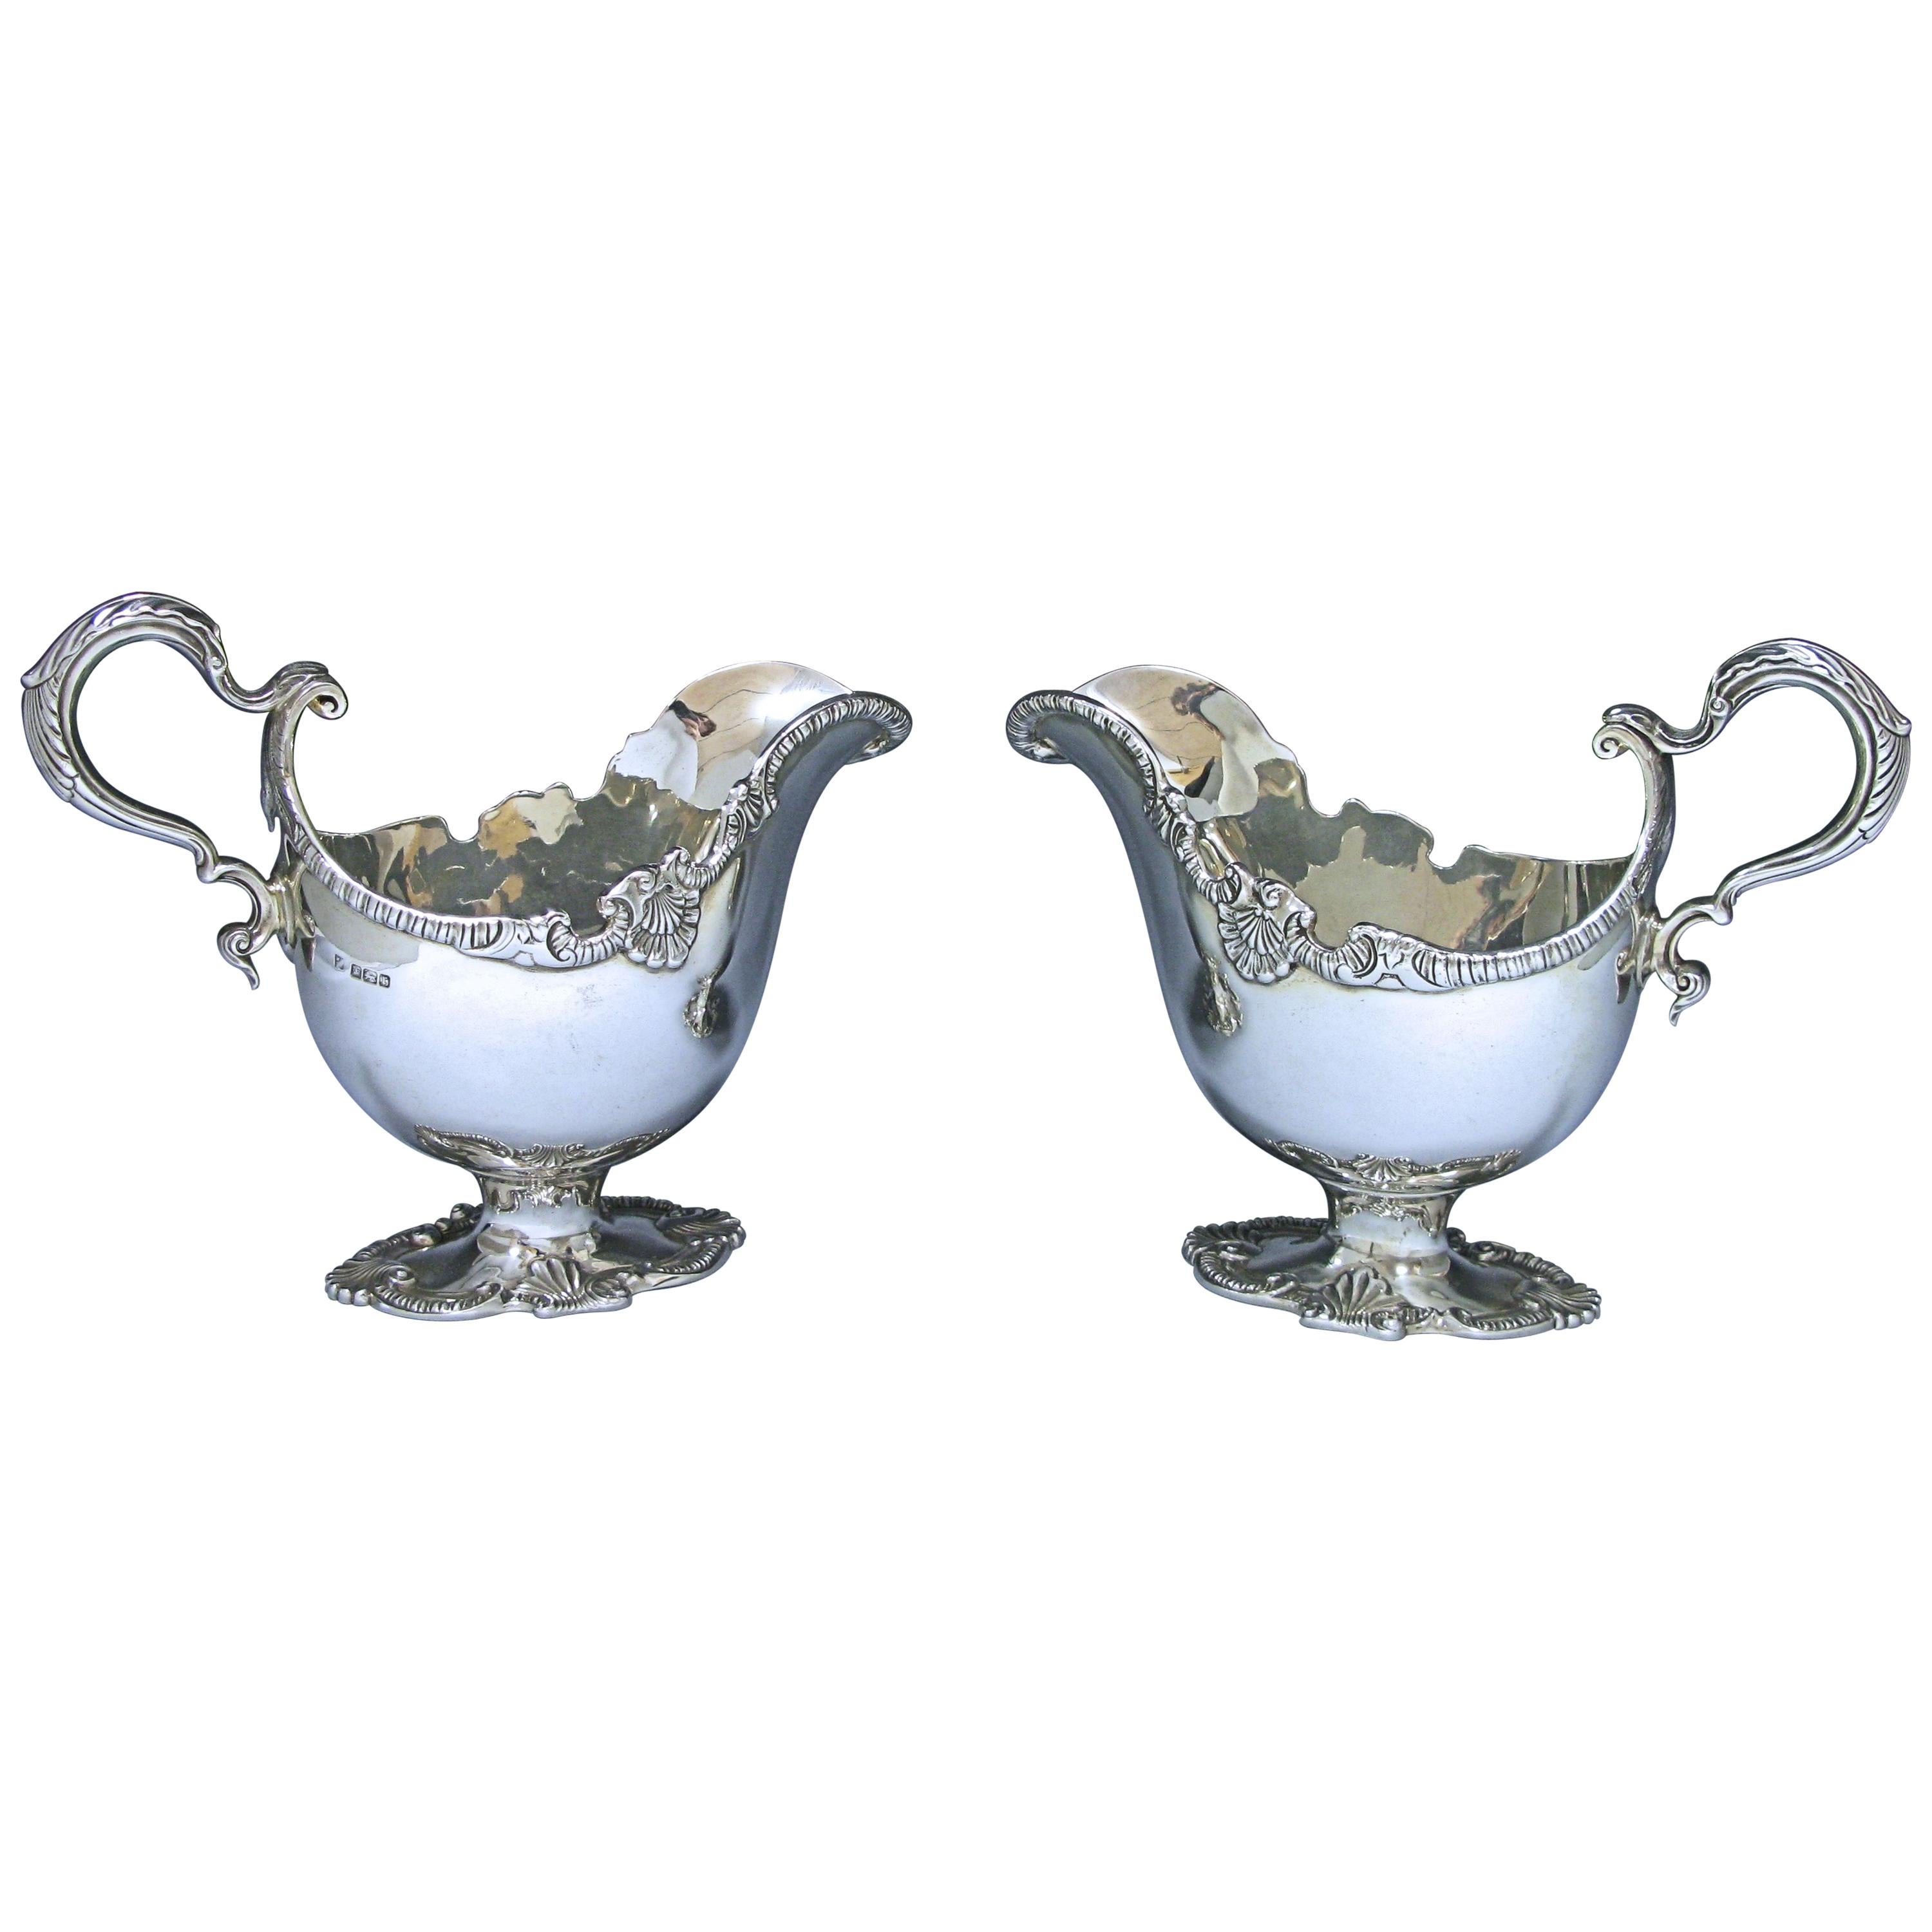 Pair of Edwardian Sterling Silver Sauce Boats Made in 1909 For Sale